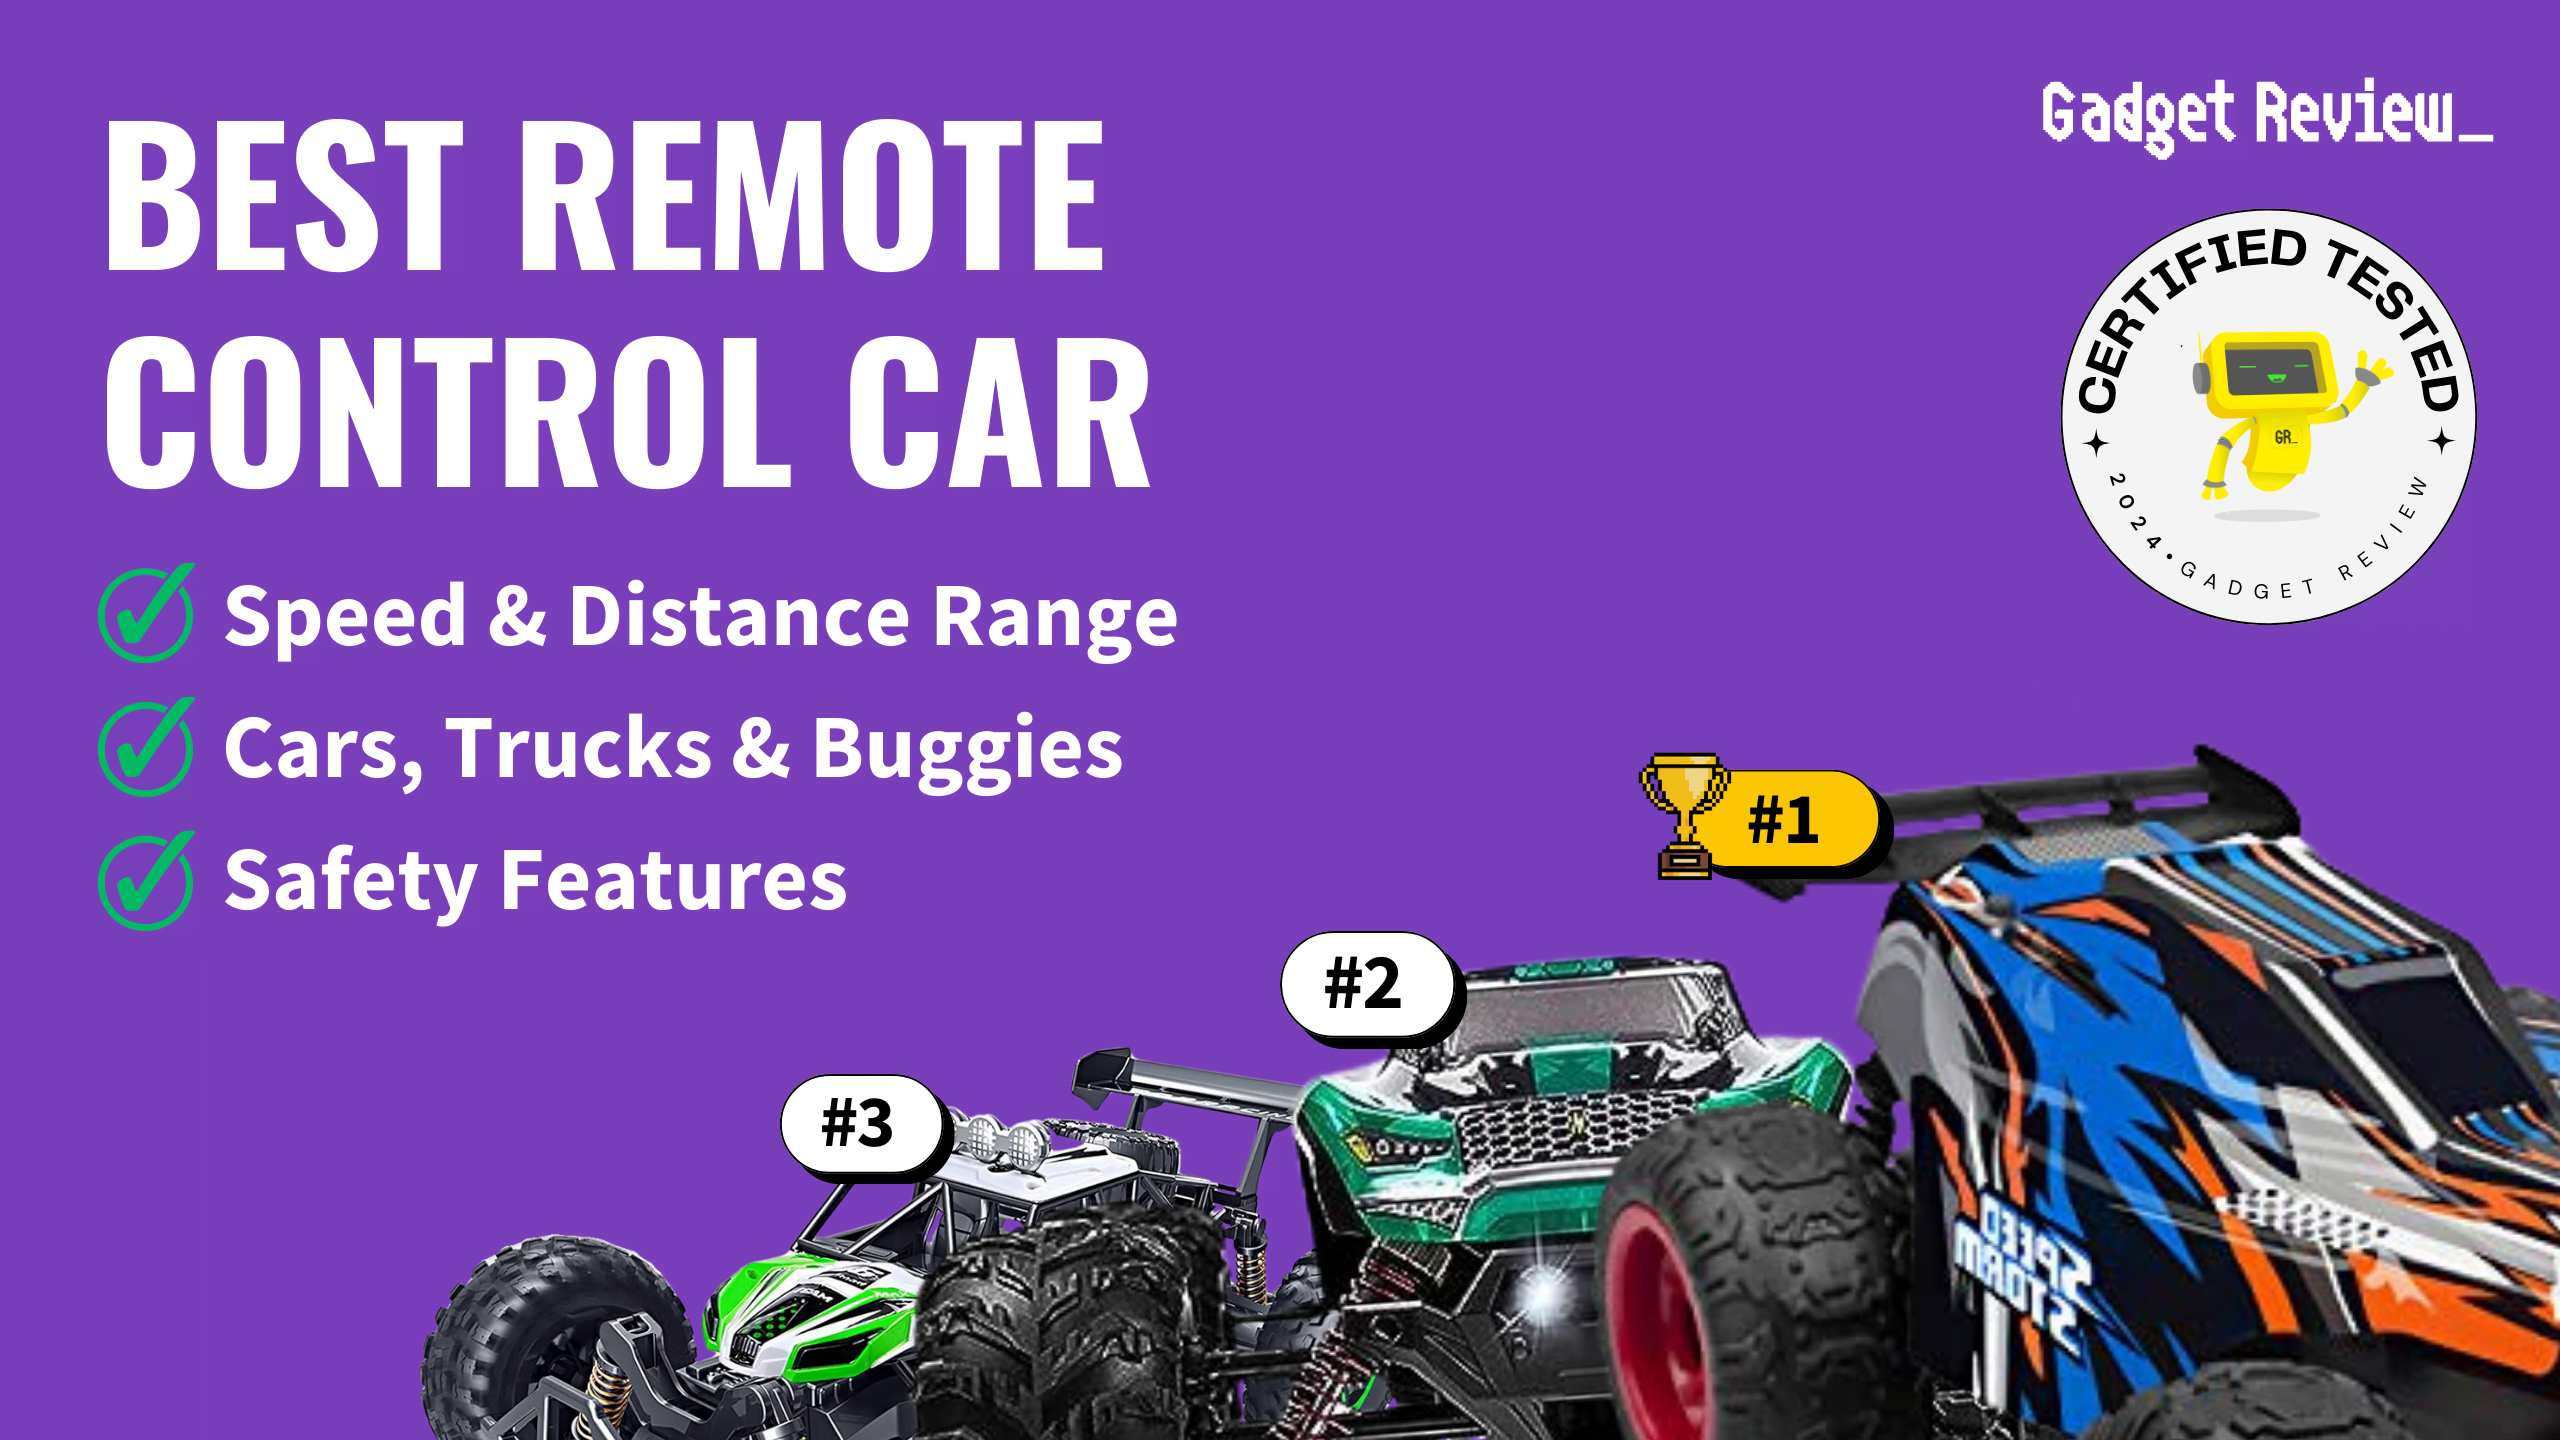 best remote control car guide that shows the top best toys & game model